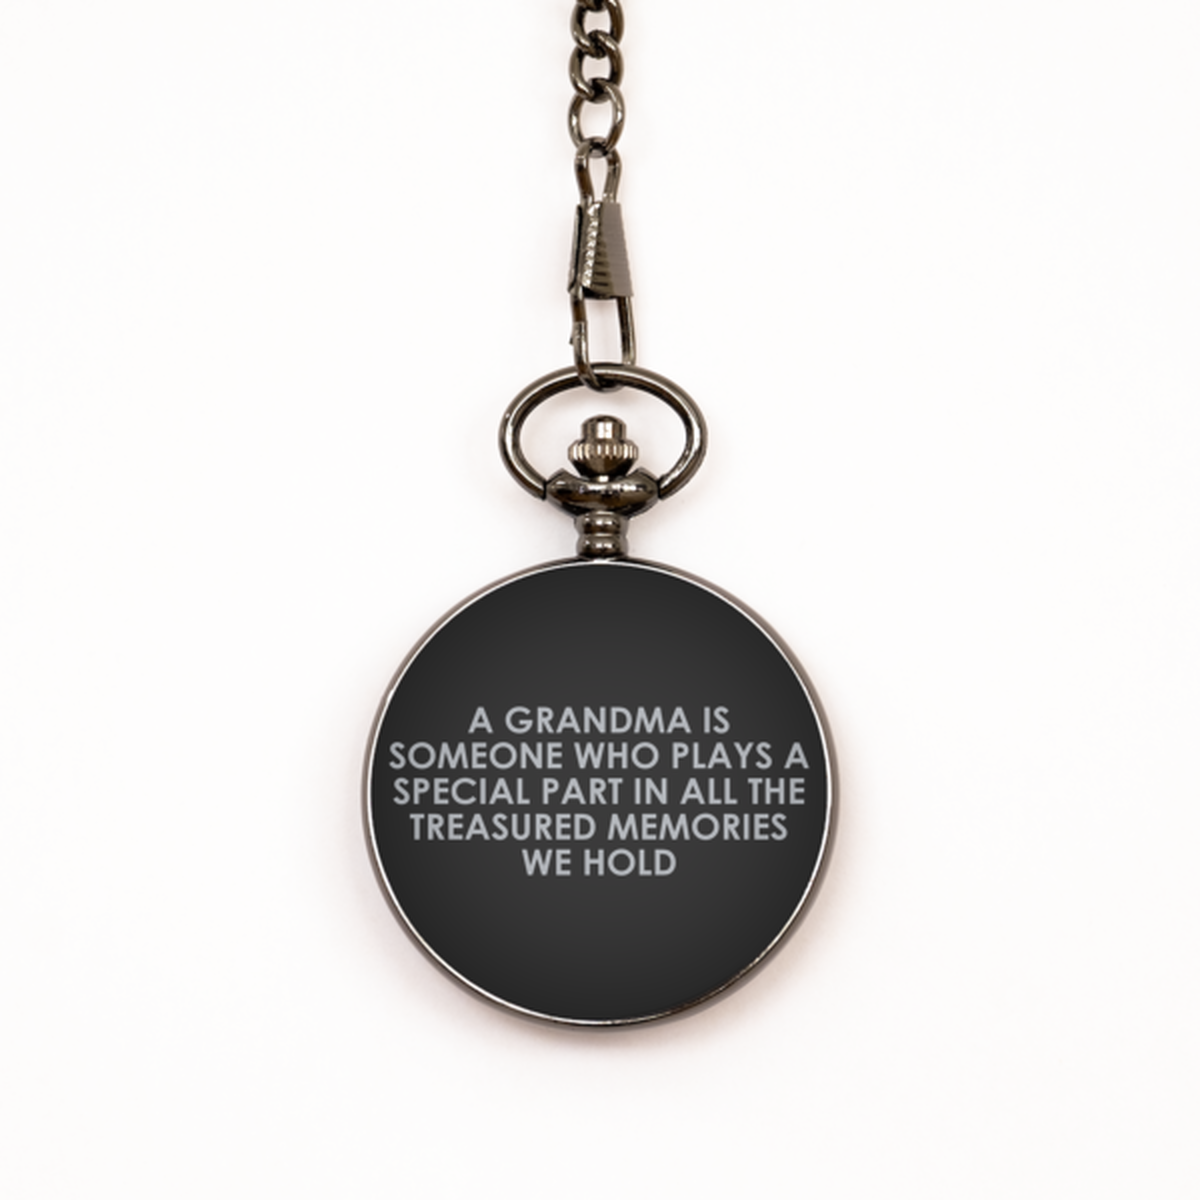 To My Grandma Black Pocket Watch, Treasured Memories, Mothers Day Gifts For Grandma From Granddaughter, Birthday Gifts For Women